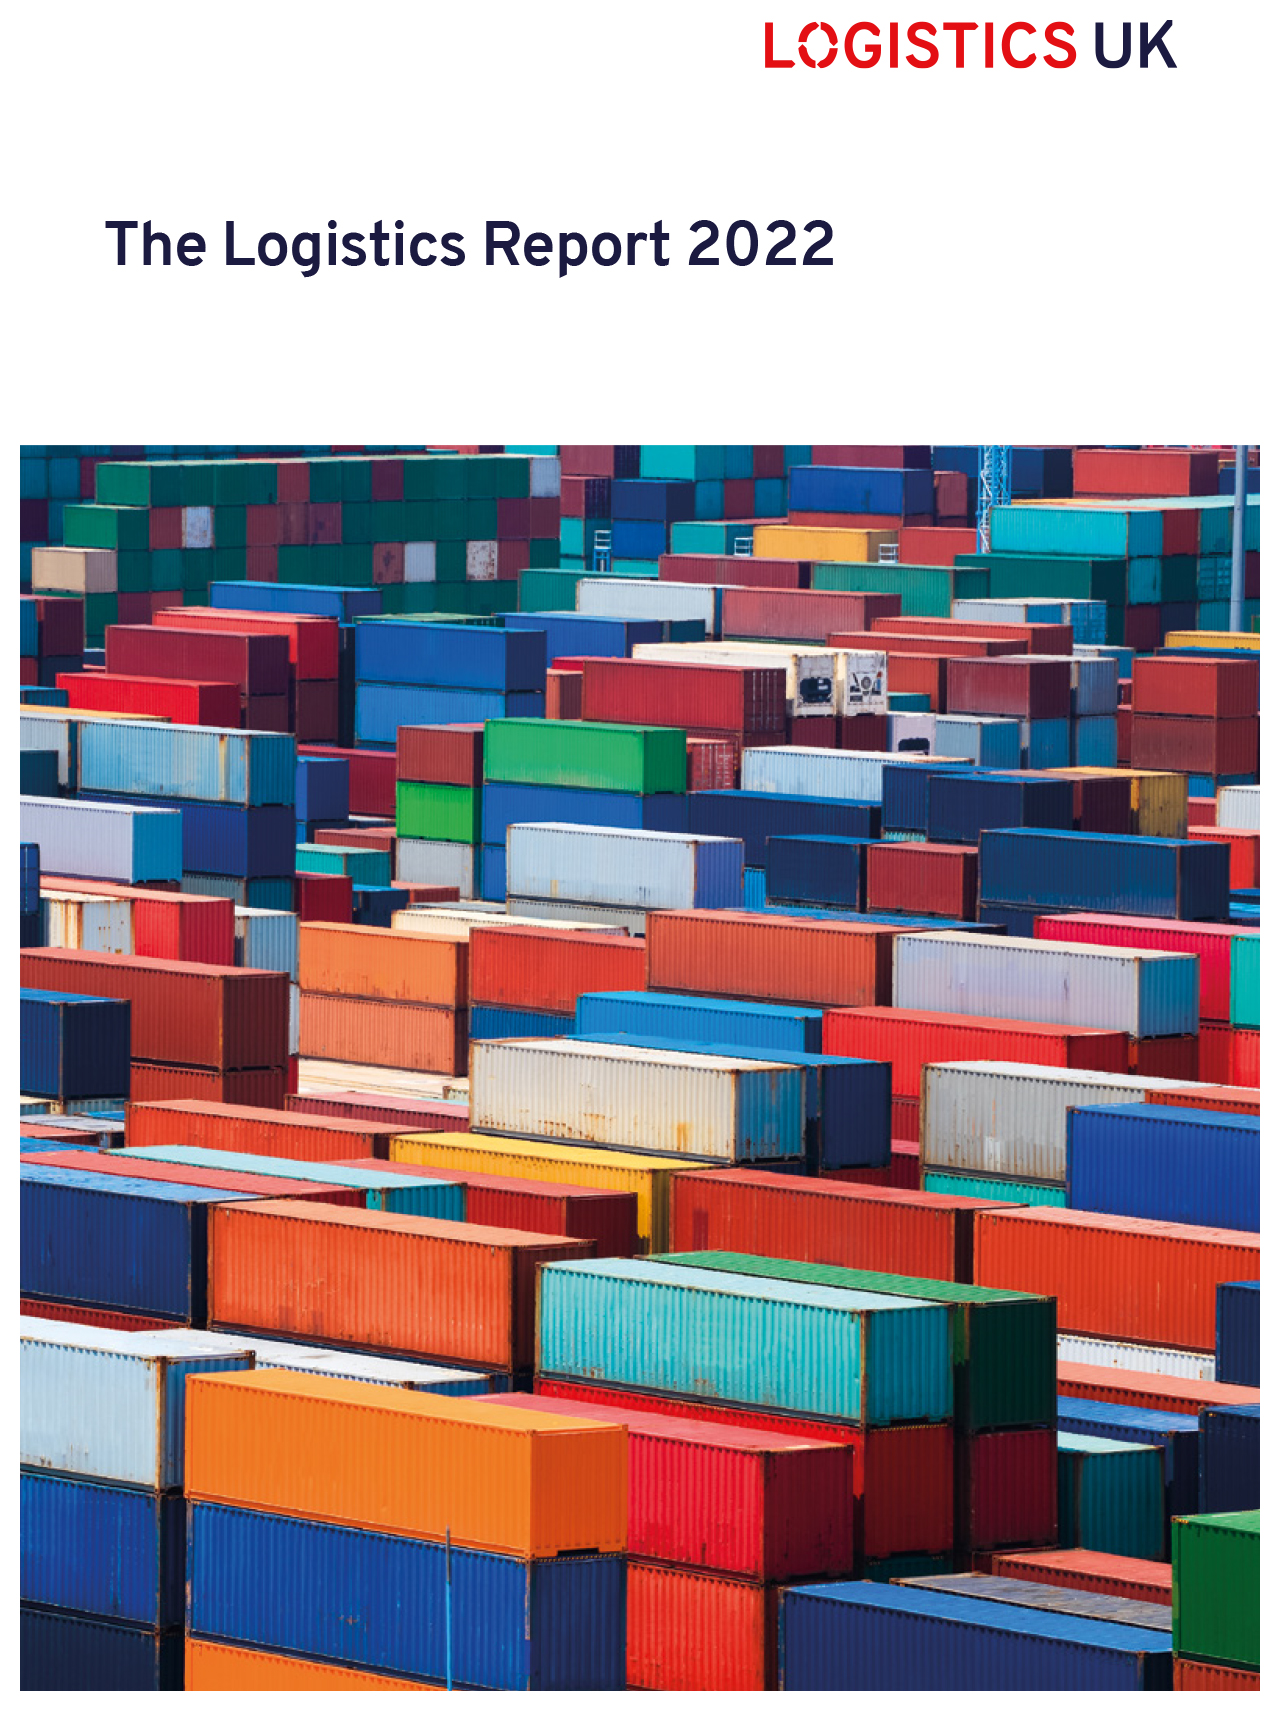 Uncertain Conditions Put Pressure On Supply Chains Logistics UK Report